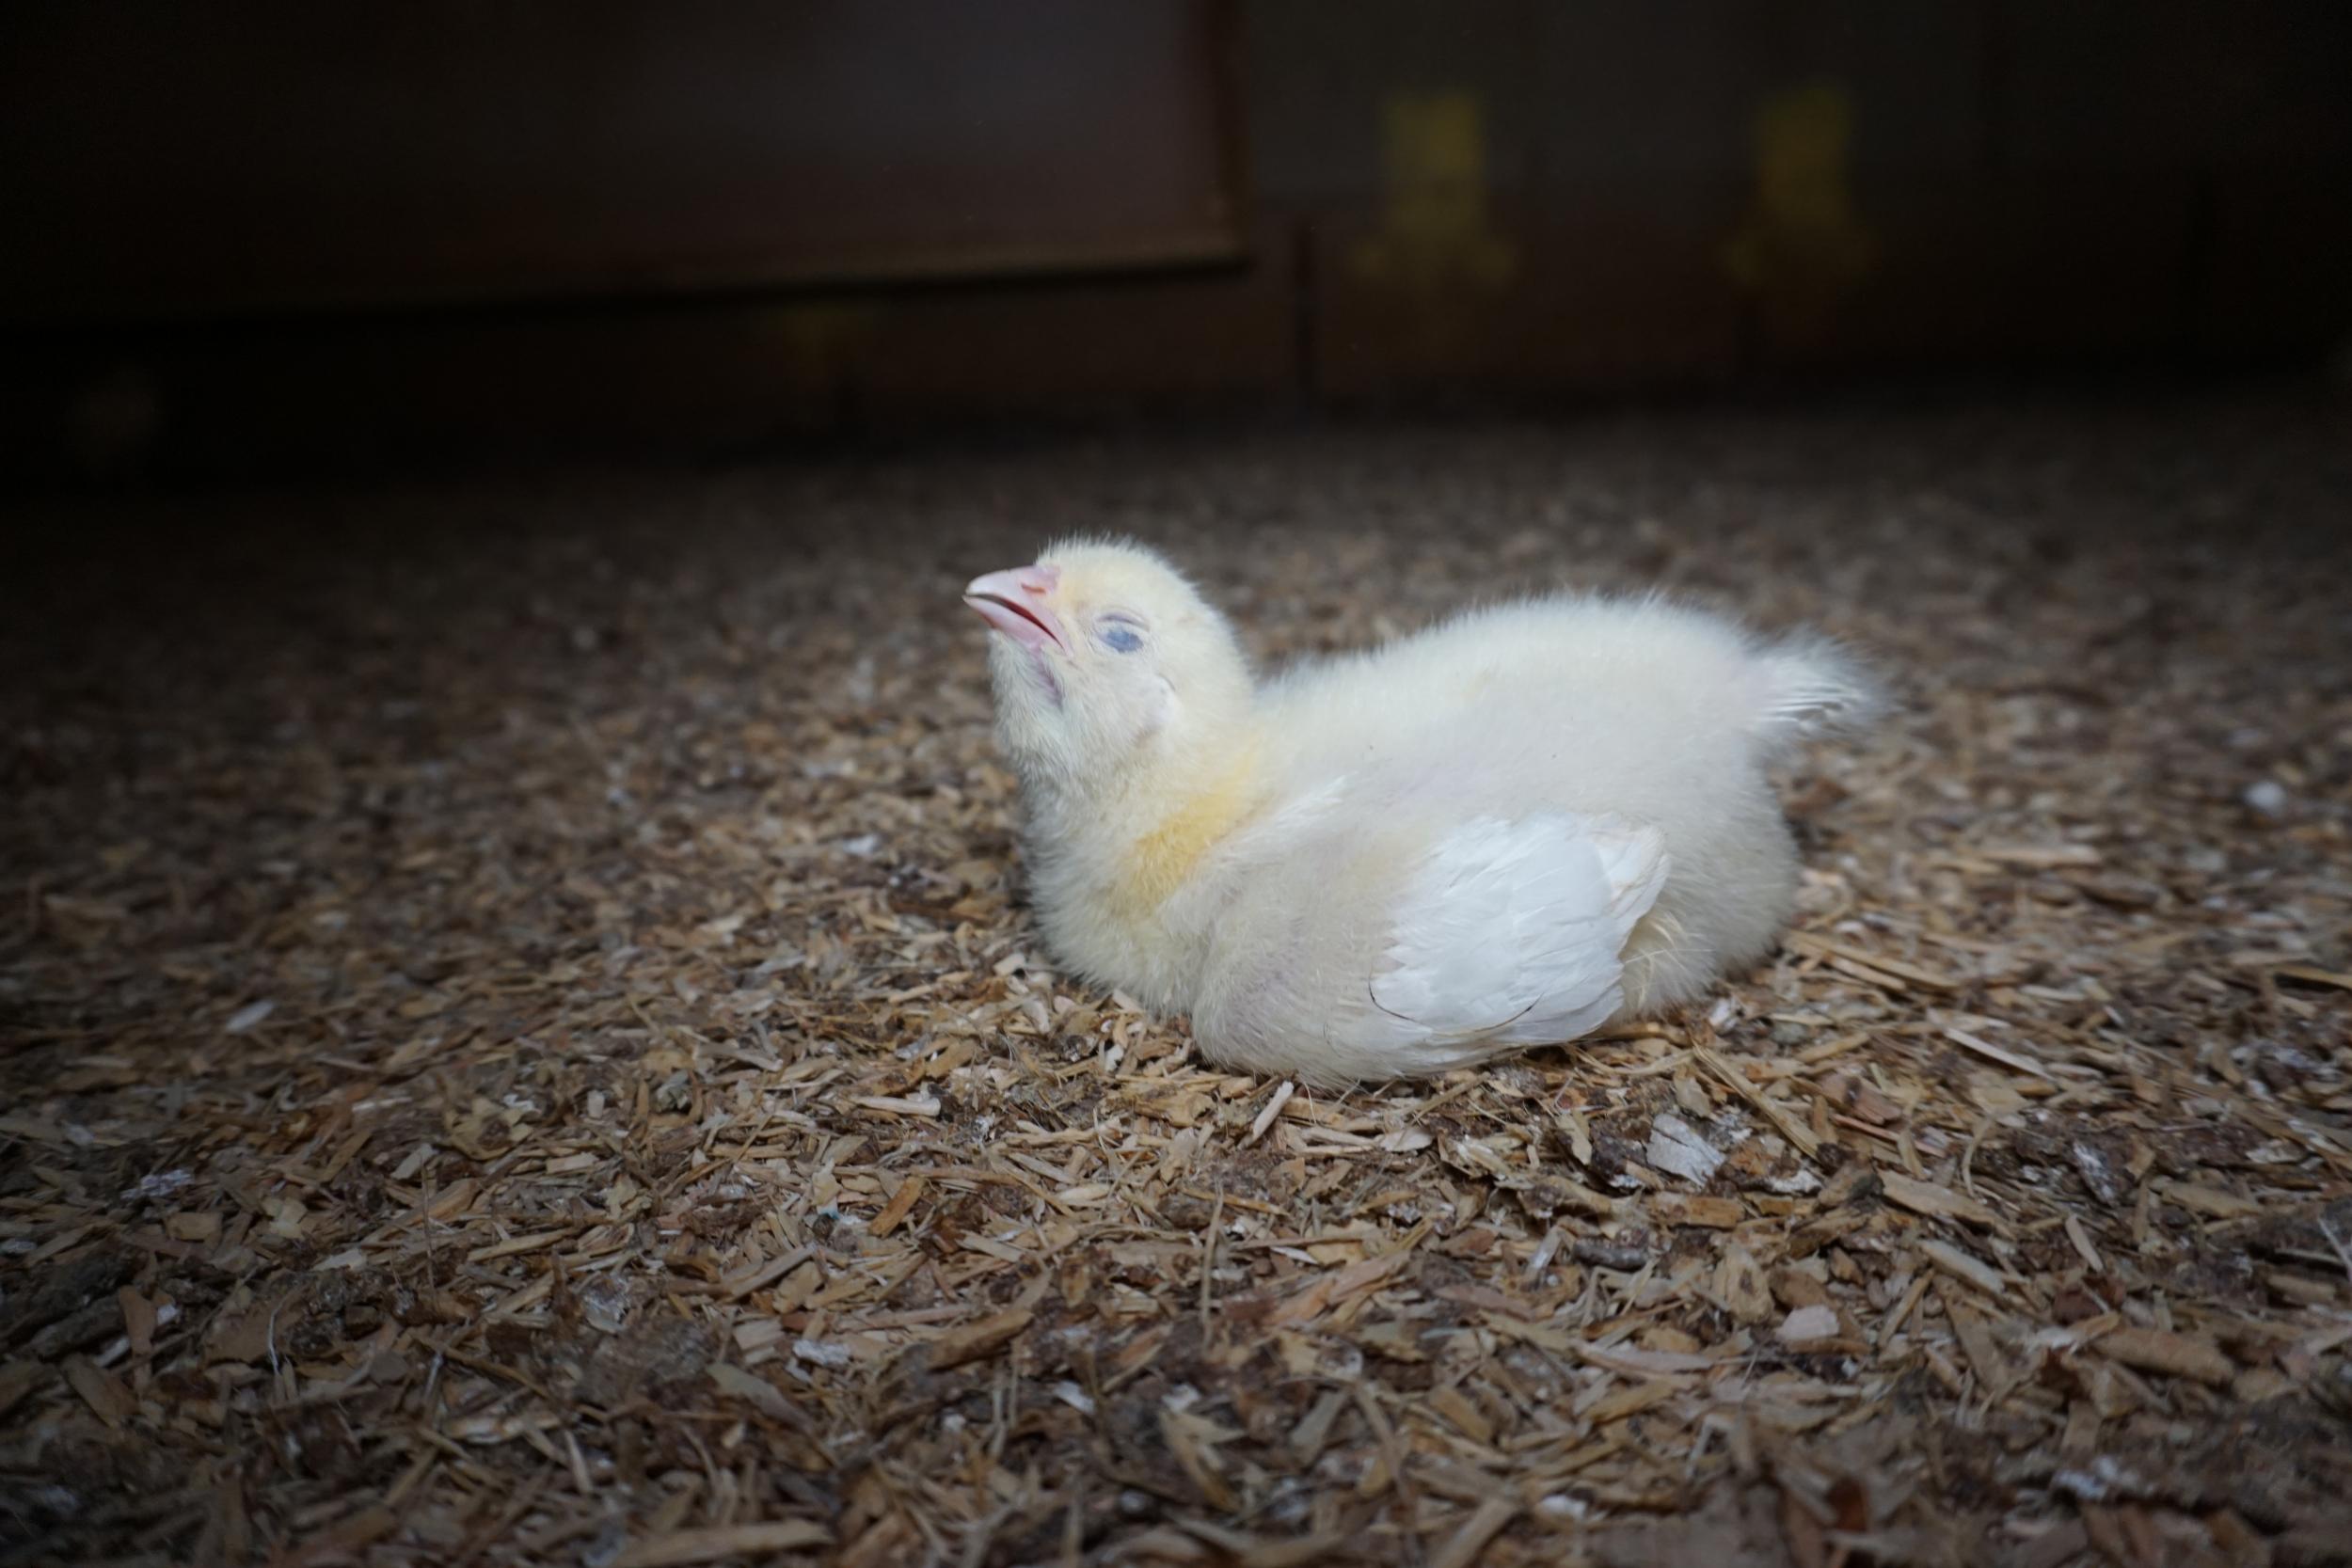 This chick was ‘gasping for breath’ as a result of being bred to grow too rapidly